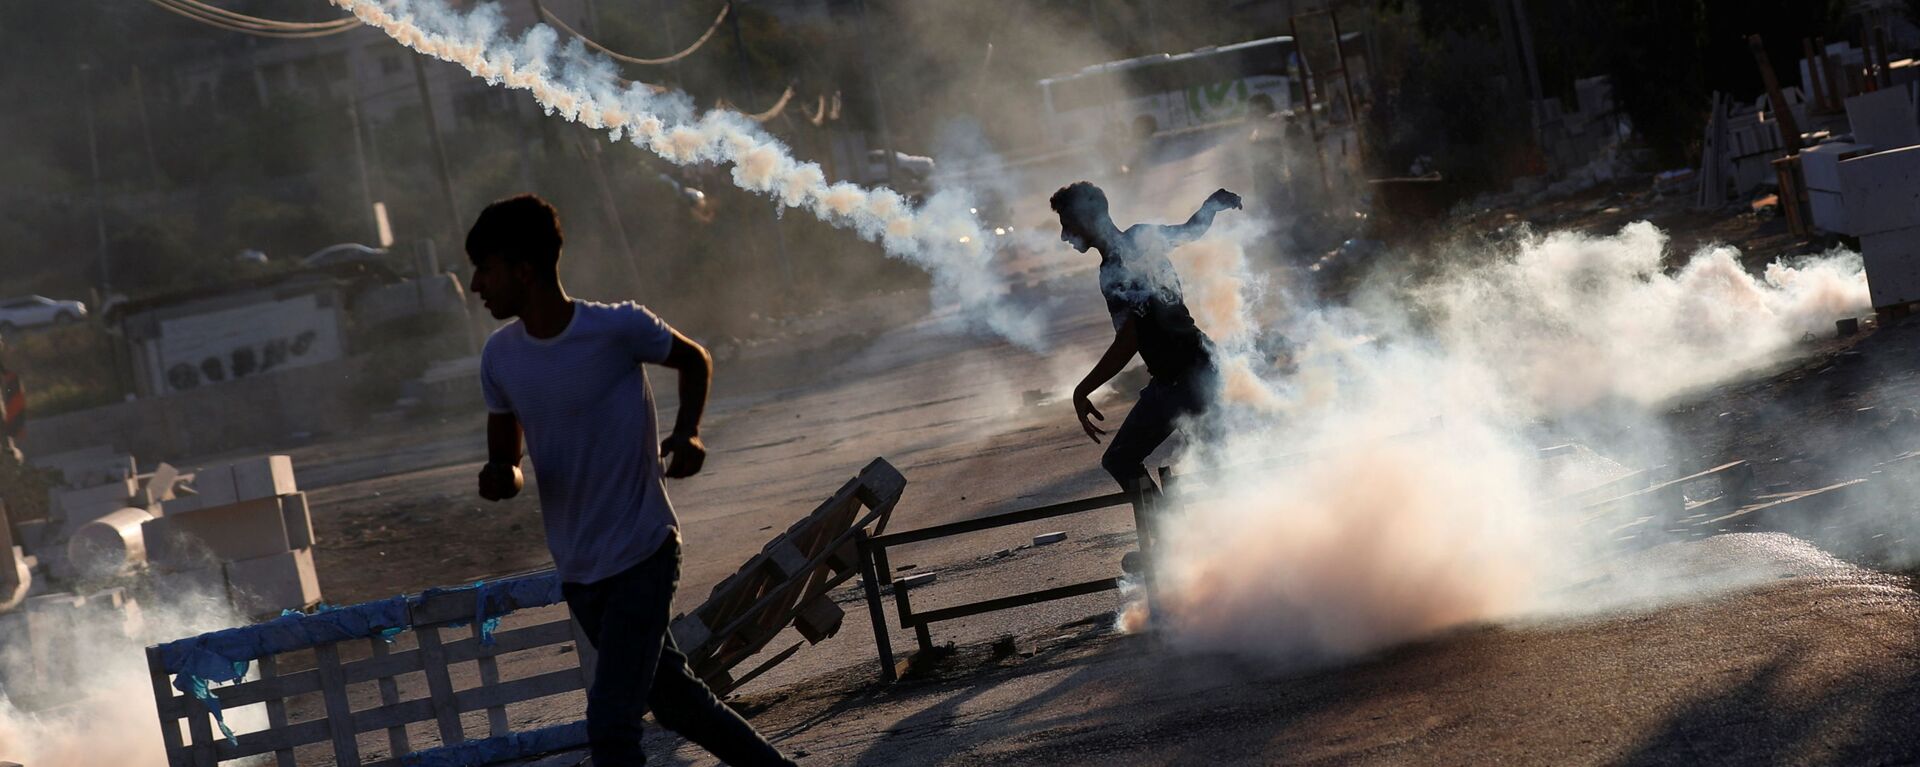 Palestinian protester throws back a tear gas grenade during a protest over the killing of a Palestinian man by Israeli soldiers, according to health ministry, in Beita in the Israeli-occupied West Bank July 28, 2021 - Sputnik International, 1920, 15.08.2021